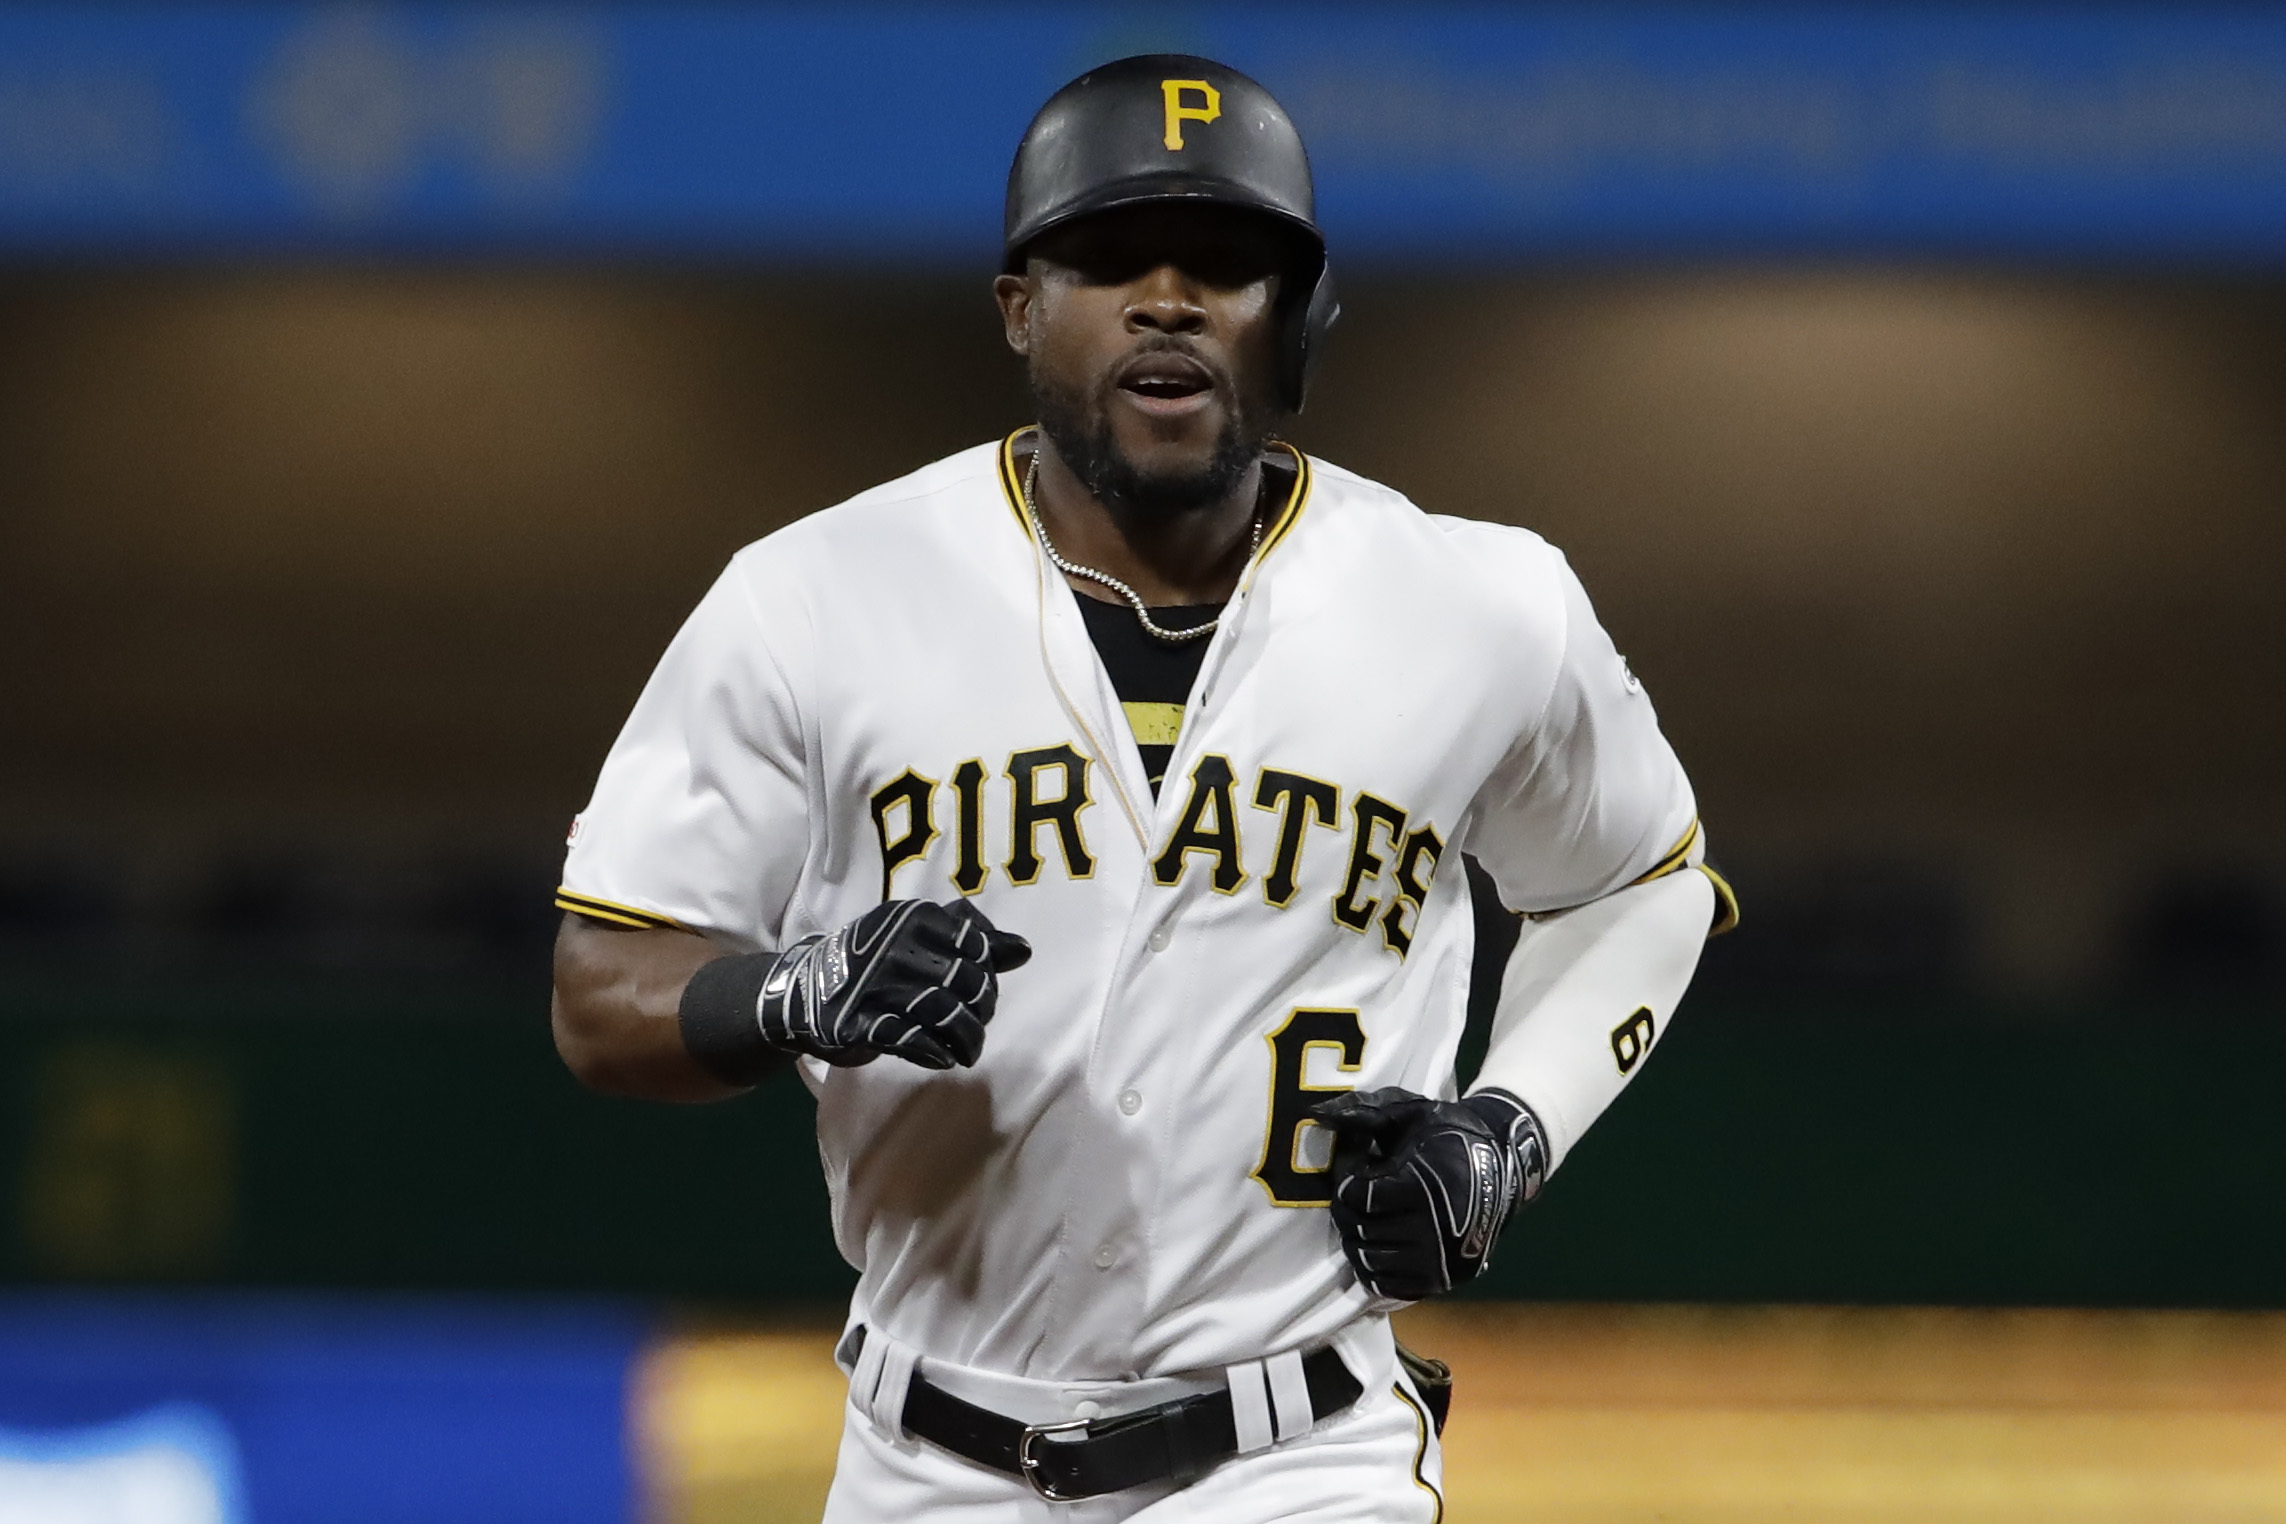 Starling Marte Trade Rumors: Pirates Seek Top Catching Prospect in